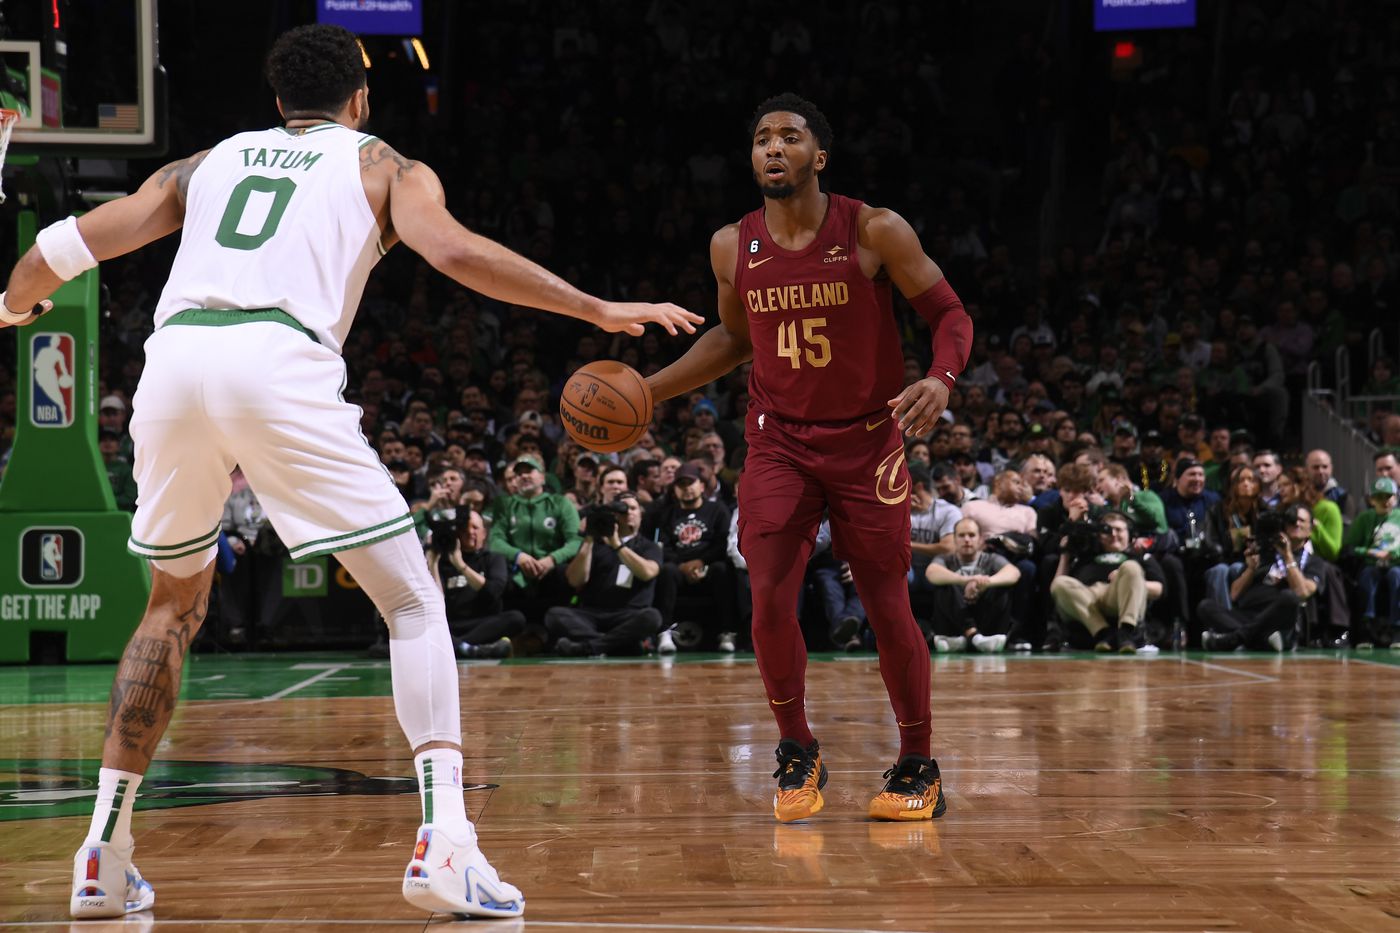 Celtics - Cavaliers Live: How to Watch Online, Live Stream Info, Match Time, TV Channel | December 12 - Media7